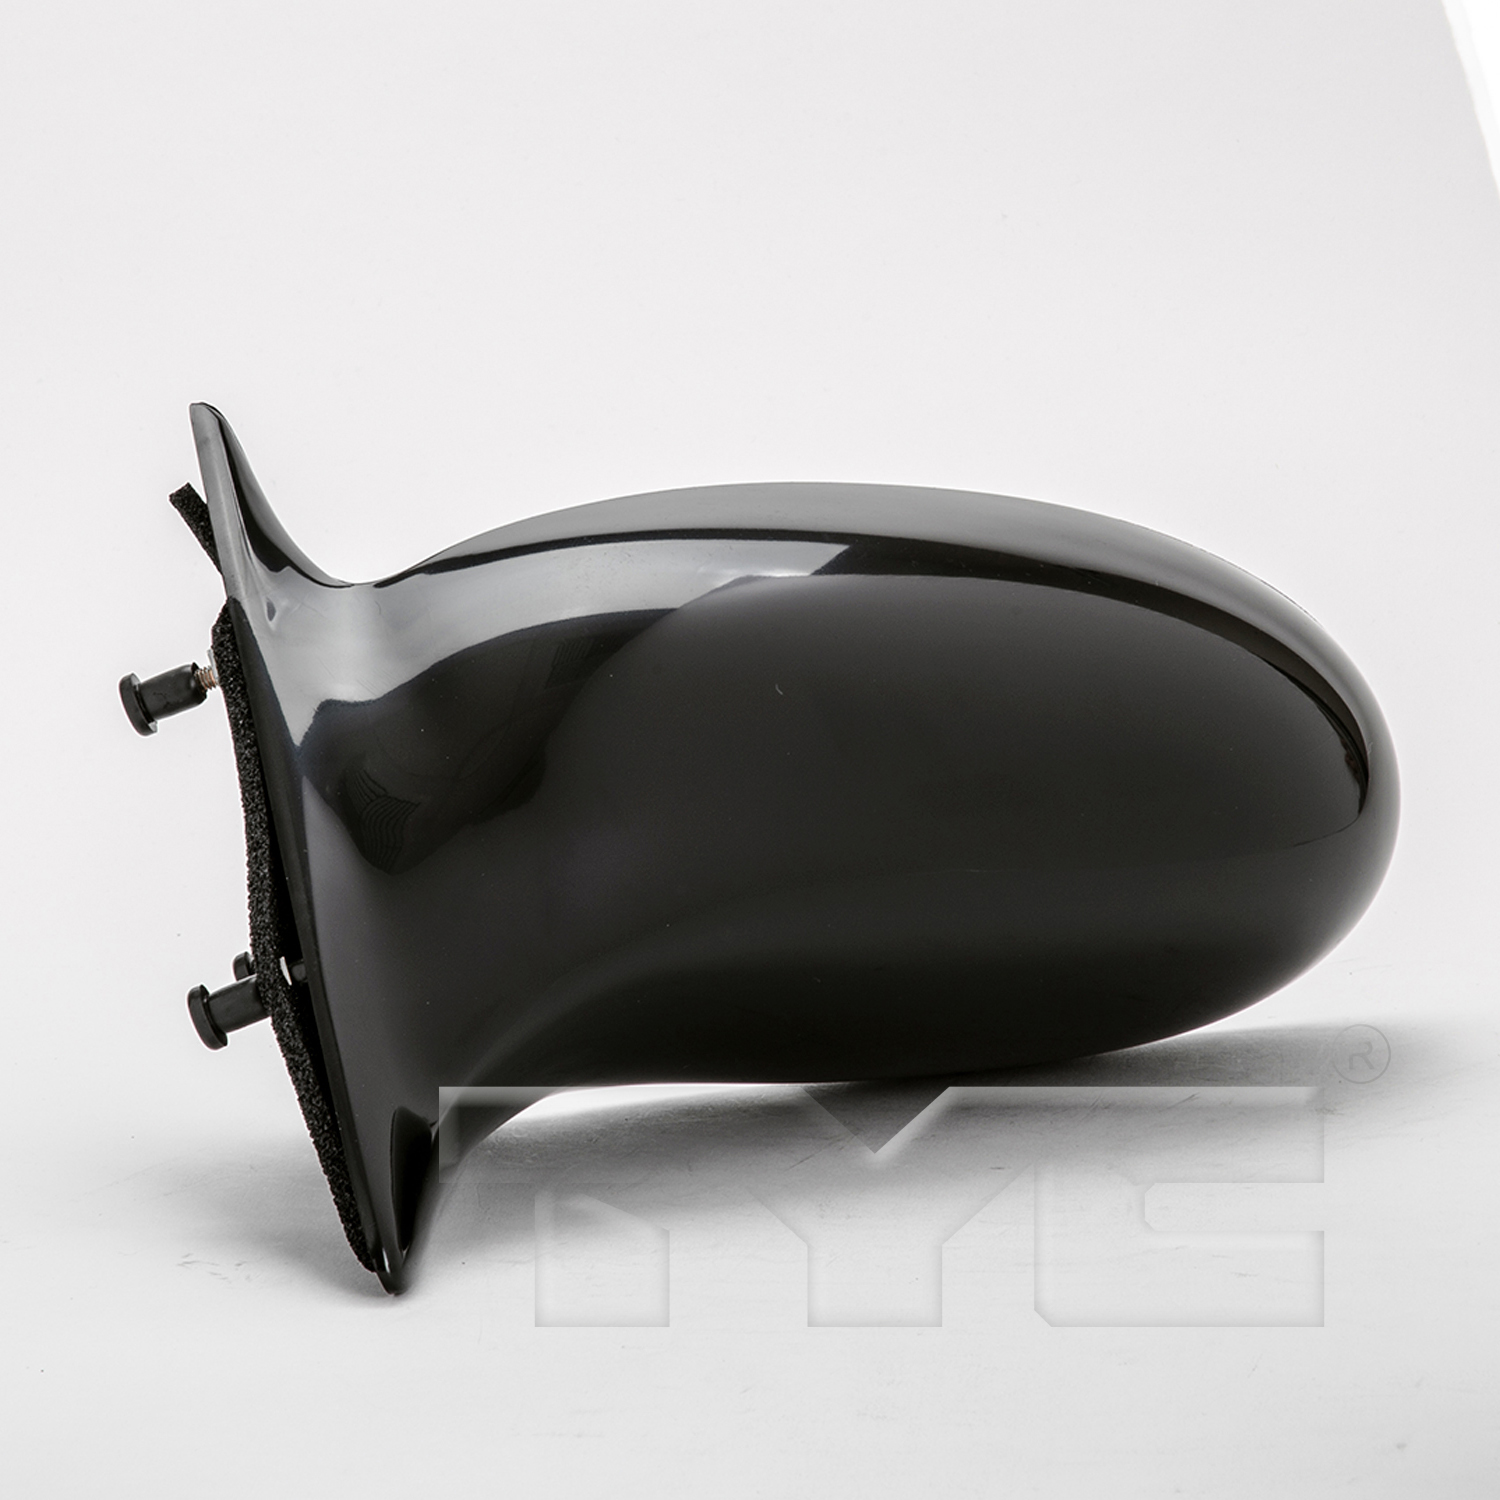 Aftermarket MIRRORS for PONTIAC - GRAND AM, GRAND AM,02-04,LT Mirror outside rear view